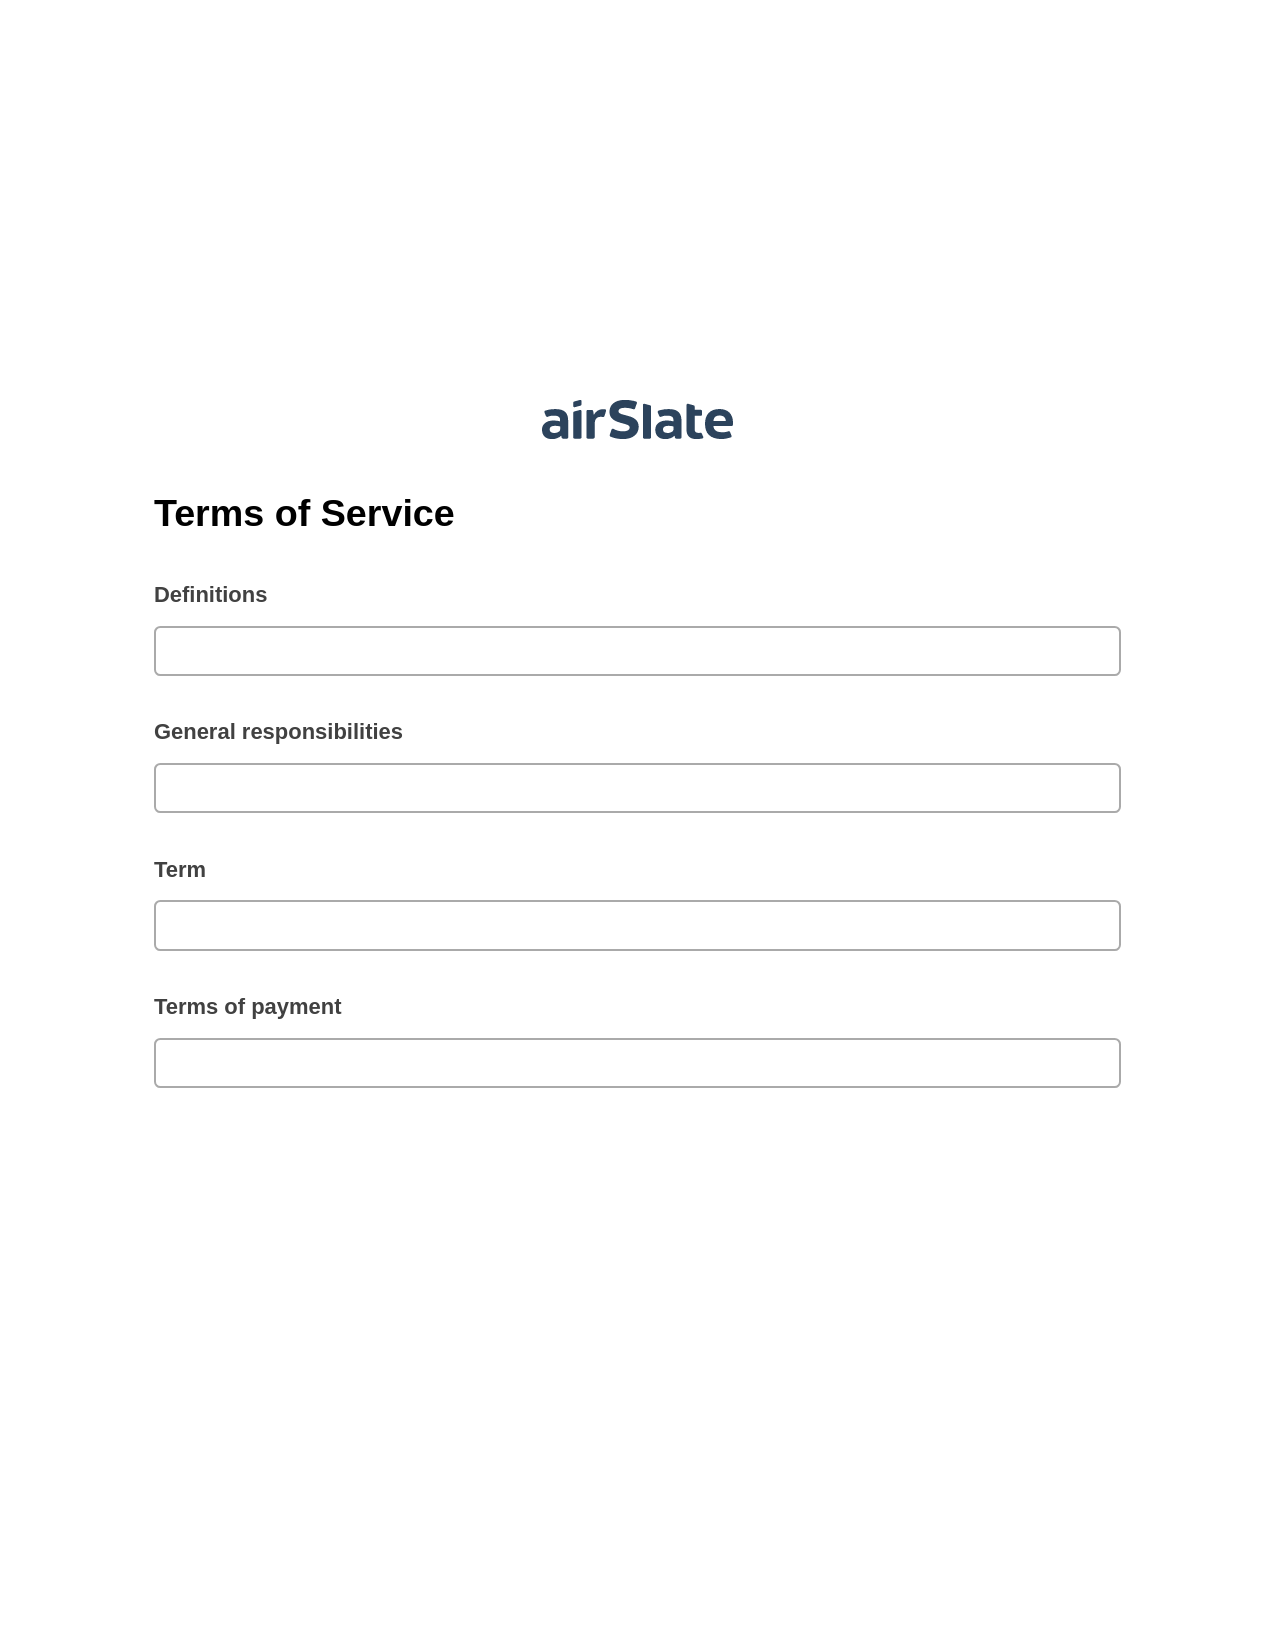 Terms of Service Pre-fill from CSV File Dropdown Options Bot, Send a Slate with Roles Bot, OneDrive Bot